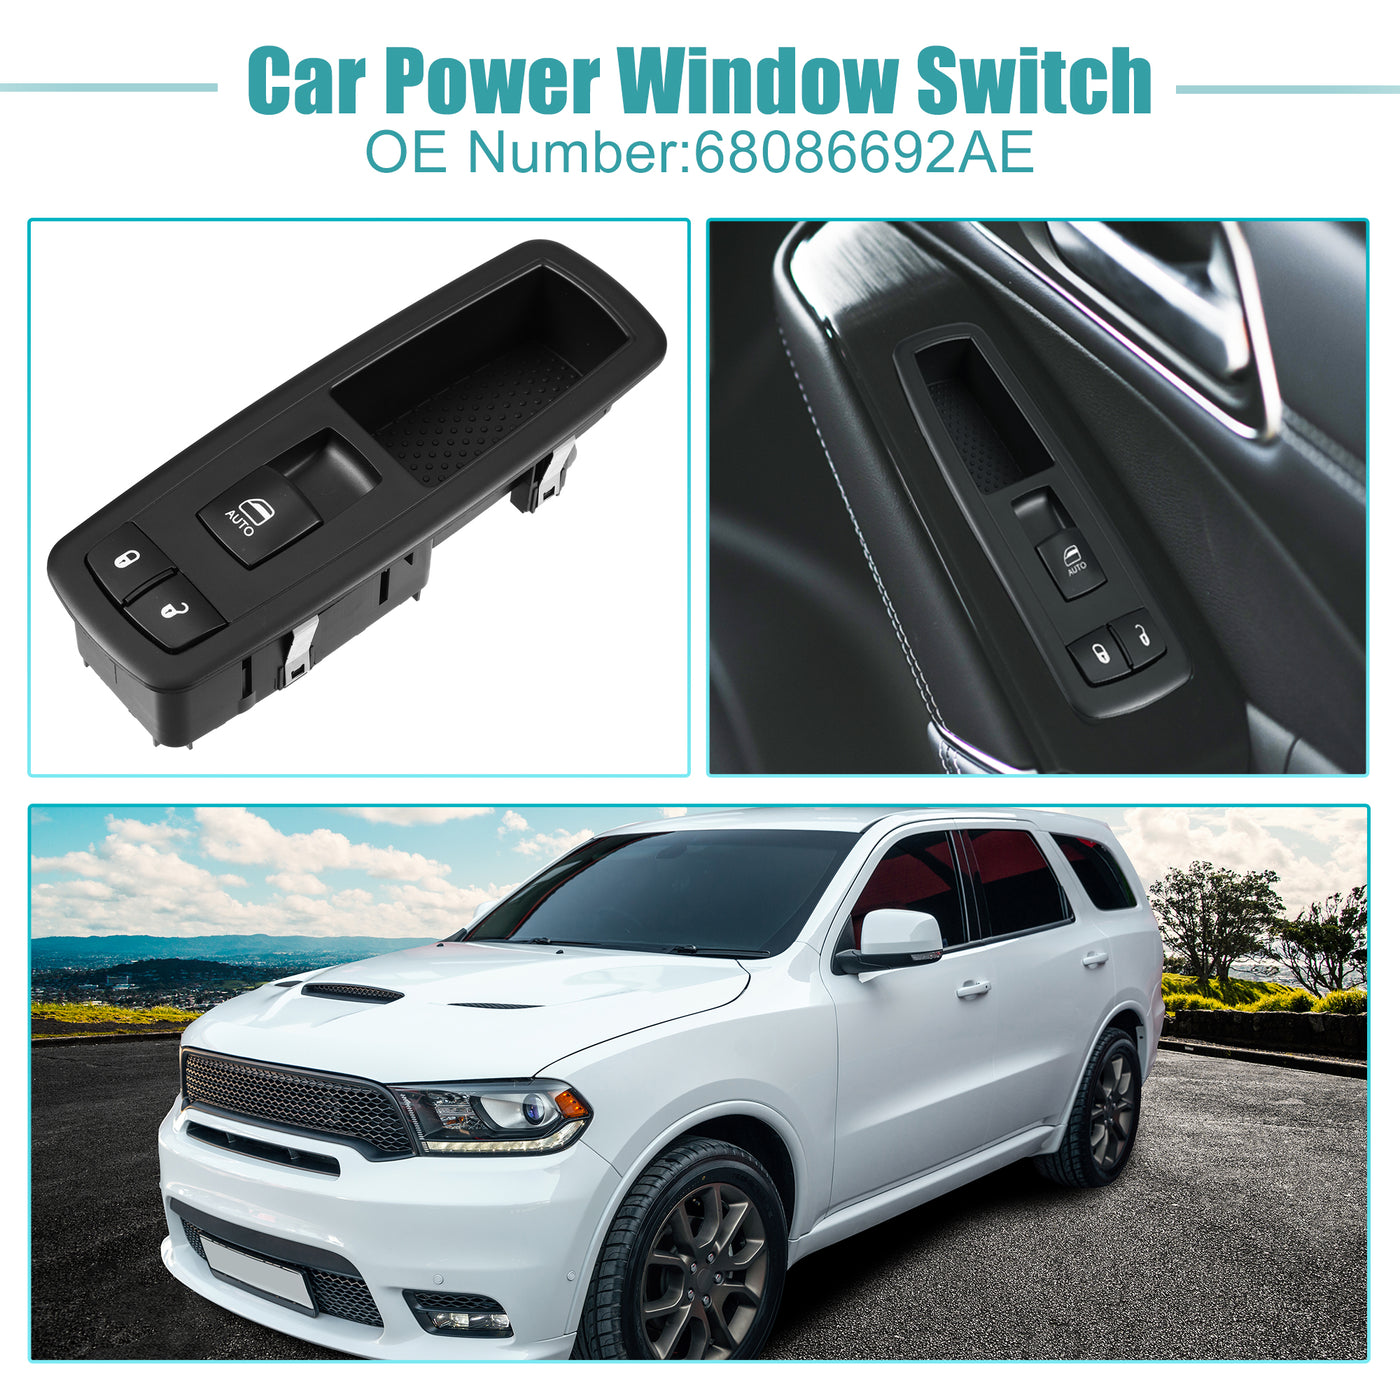 ACROPIX Power Window Switch Window Control Switch Fit for Dodge Durango 2012 2013 for Jeep Grand Cherokee with Removal Tool No.68086692AE - Pack of 1